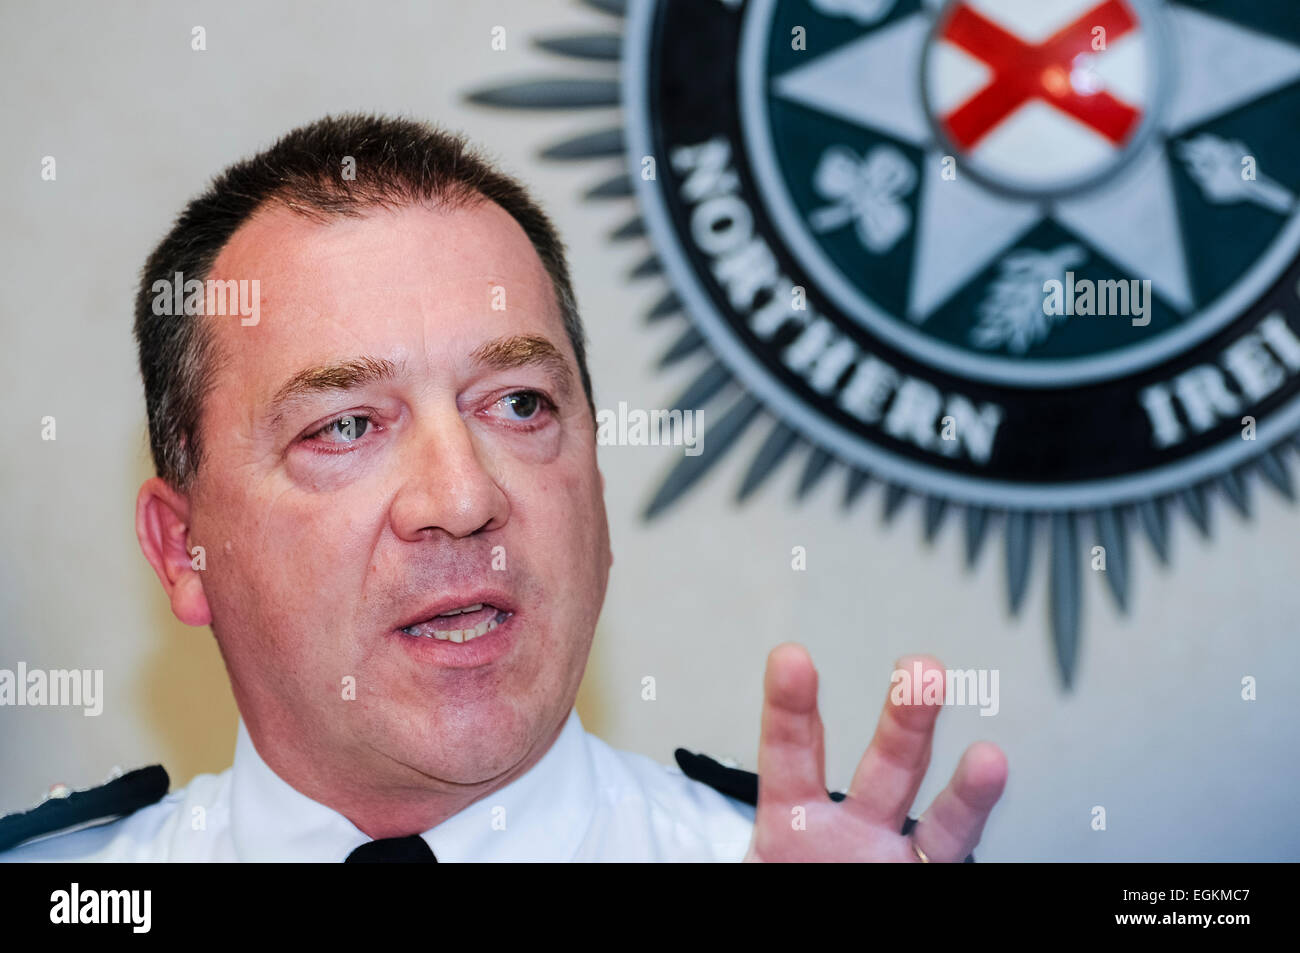 Belfast, Northern Ireland. 3rd July 2013. Police Service of Northern Ireland (PSNI) Chief Constable Matt Baggott responds to a damning report by Her Majesty's Inspectorate of Commissions (HMIC) into the Historical Enquiry Team (HET) Stock Photo